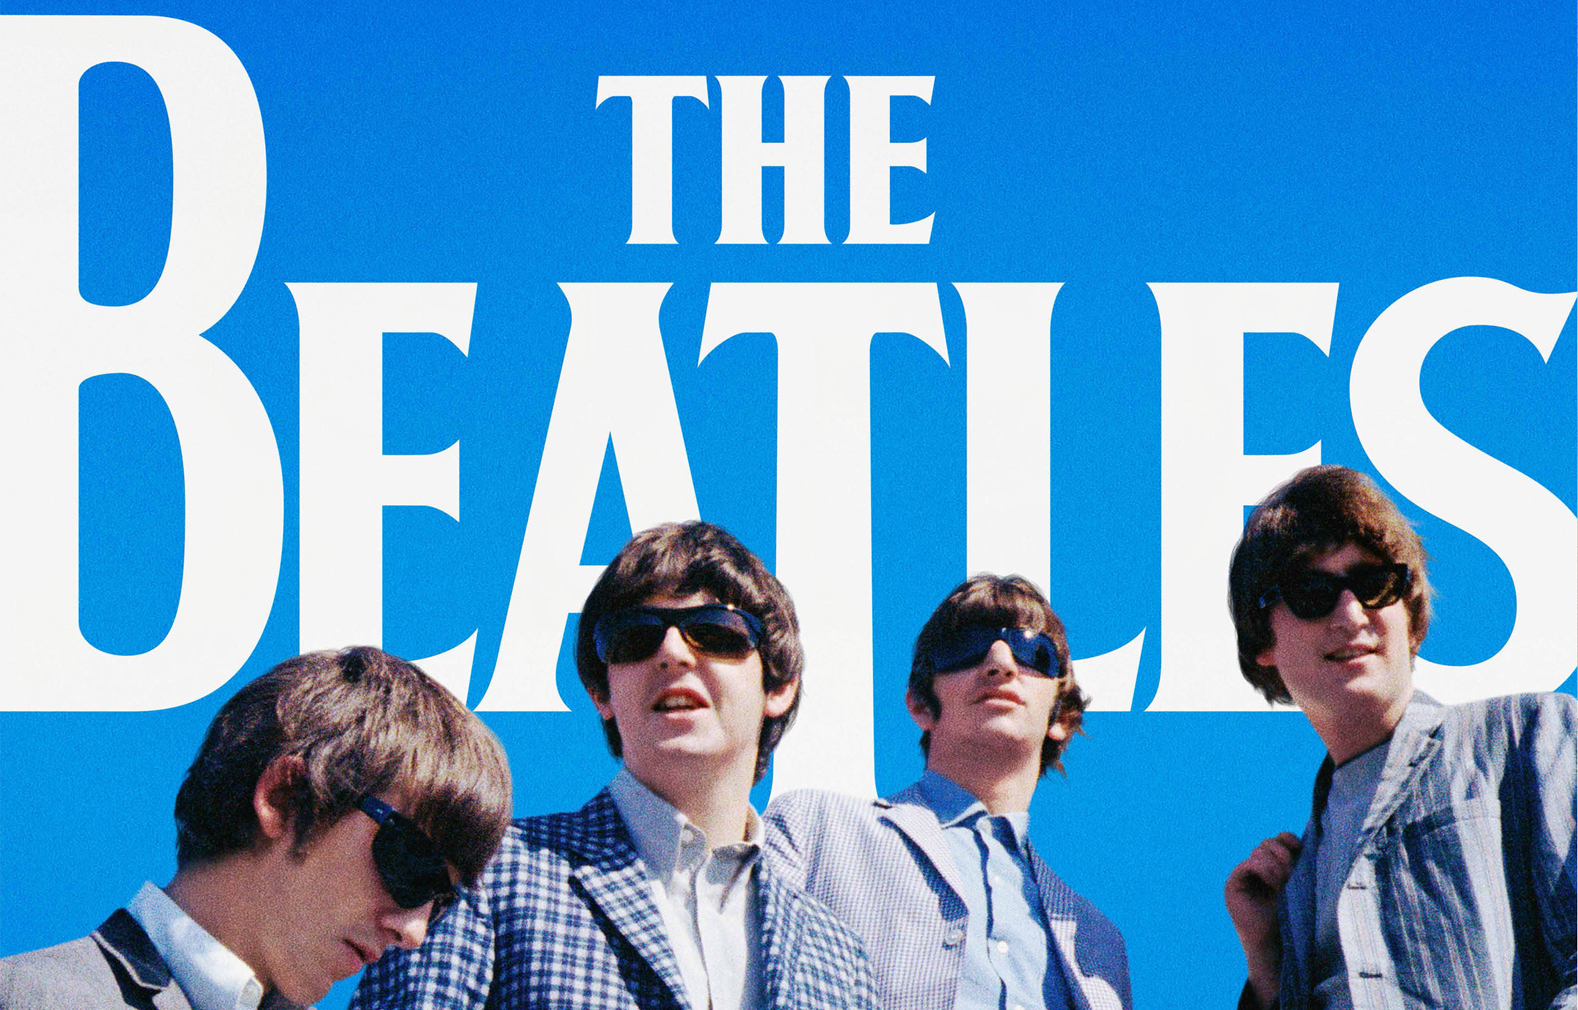 Aus release date announced for Beatles doco-movie